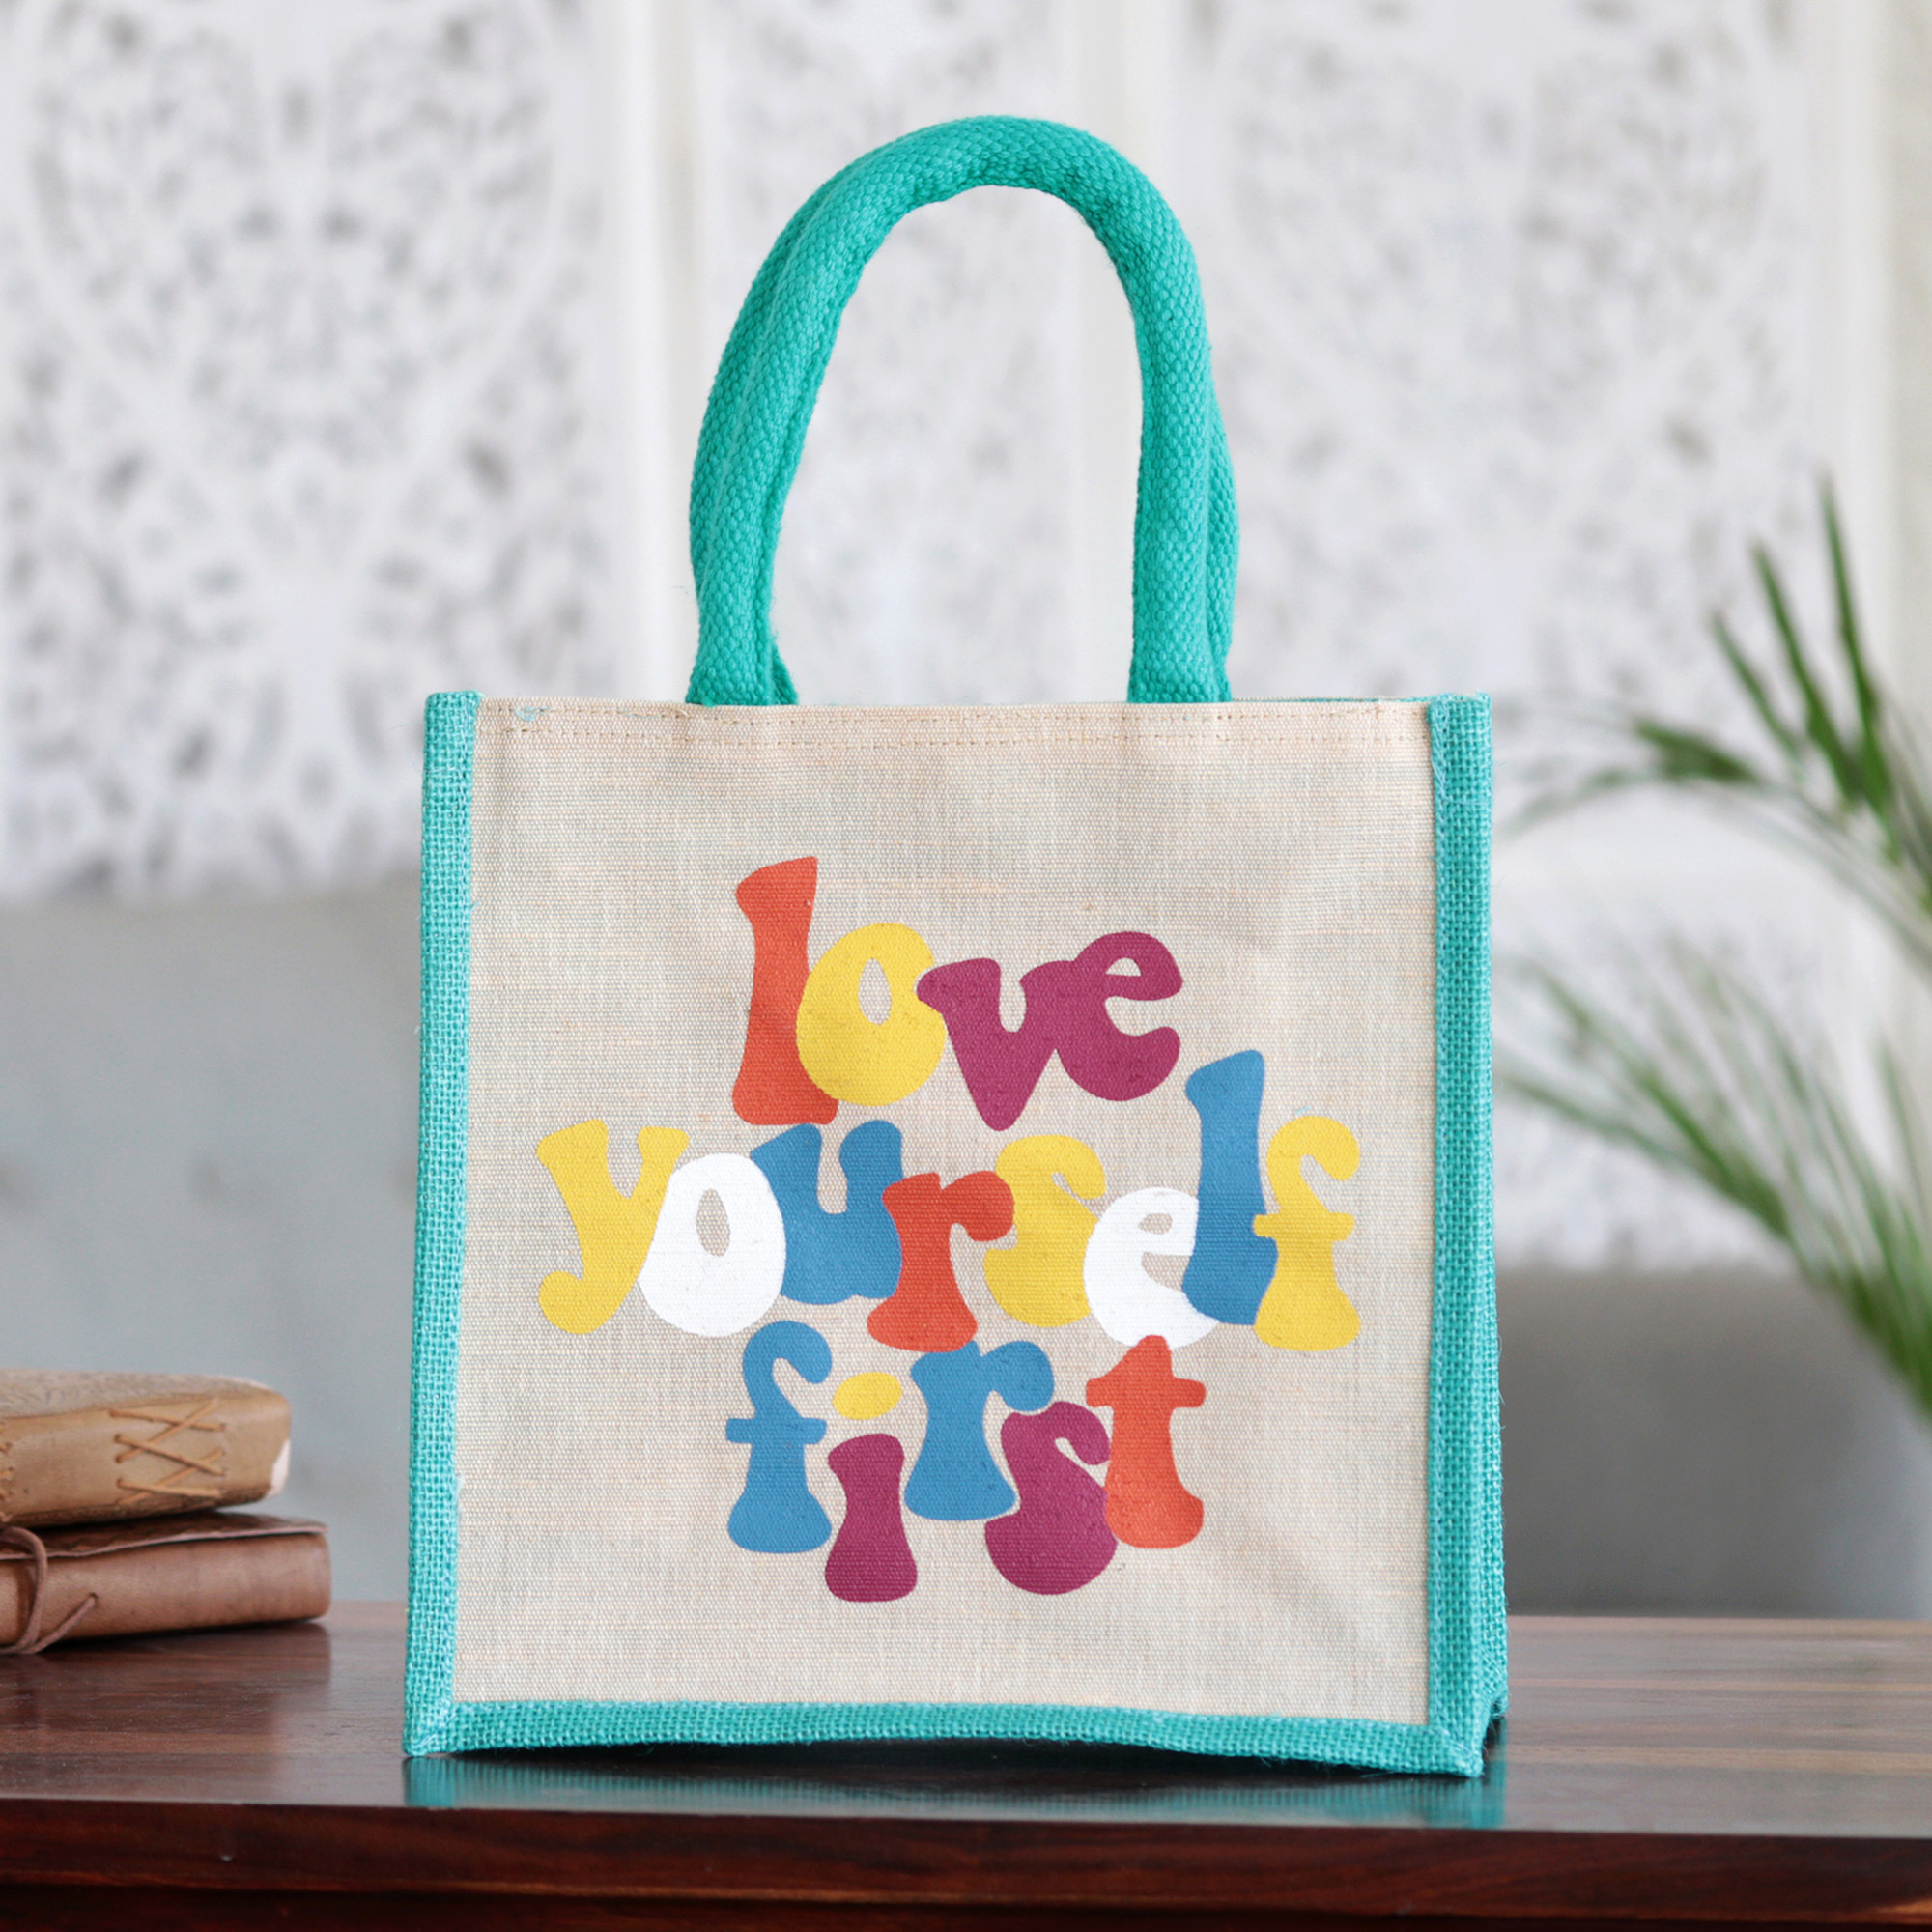 Jute and Cotton Blend Tote Bag Hand Crafted in India - Love Yourself First